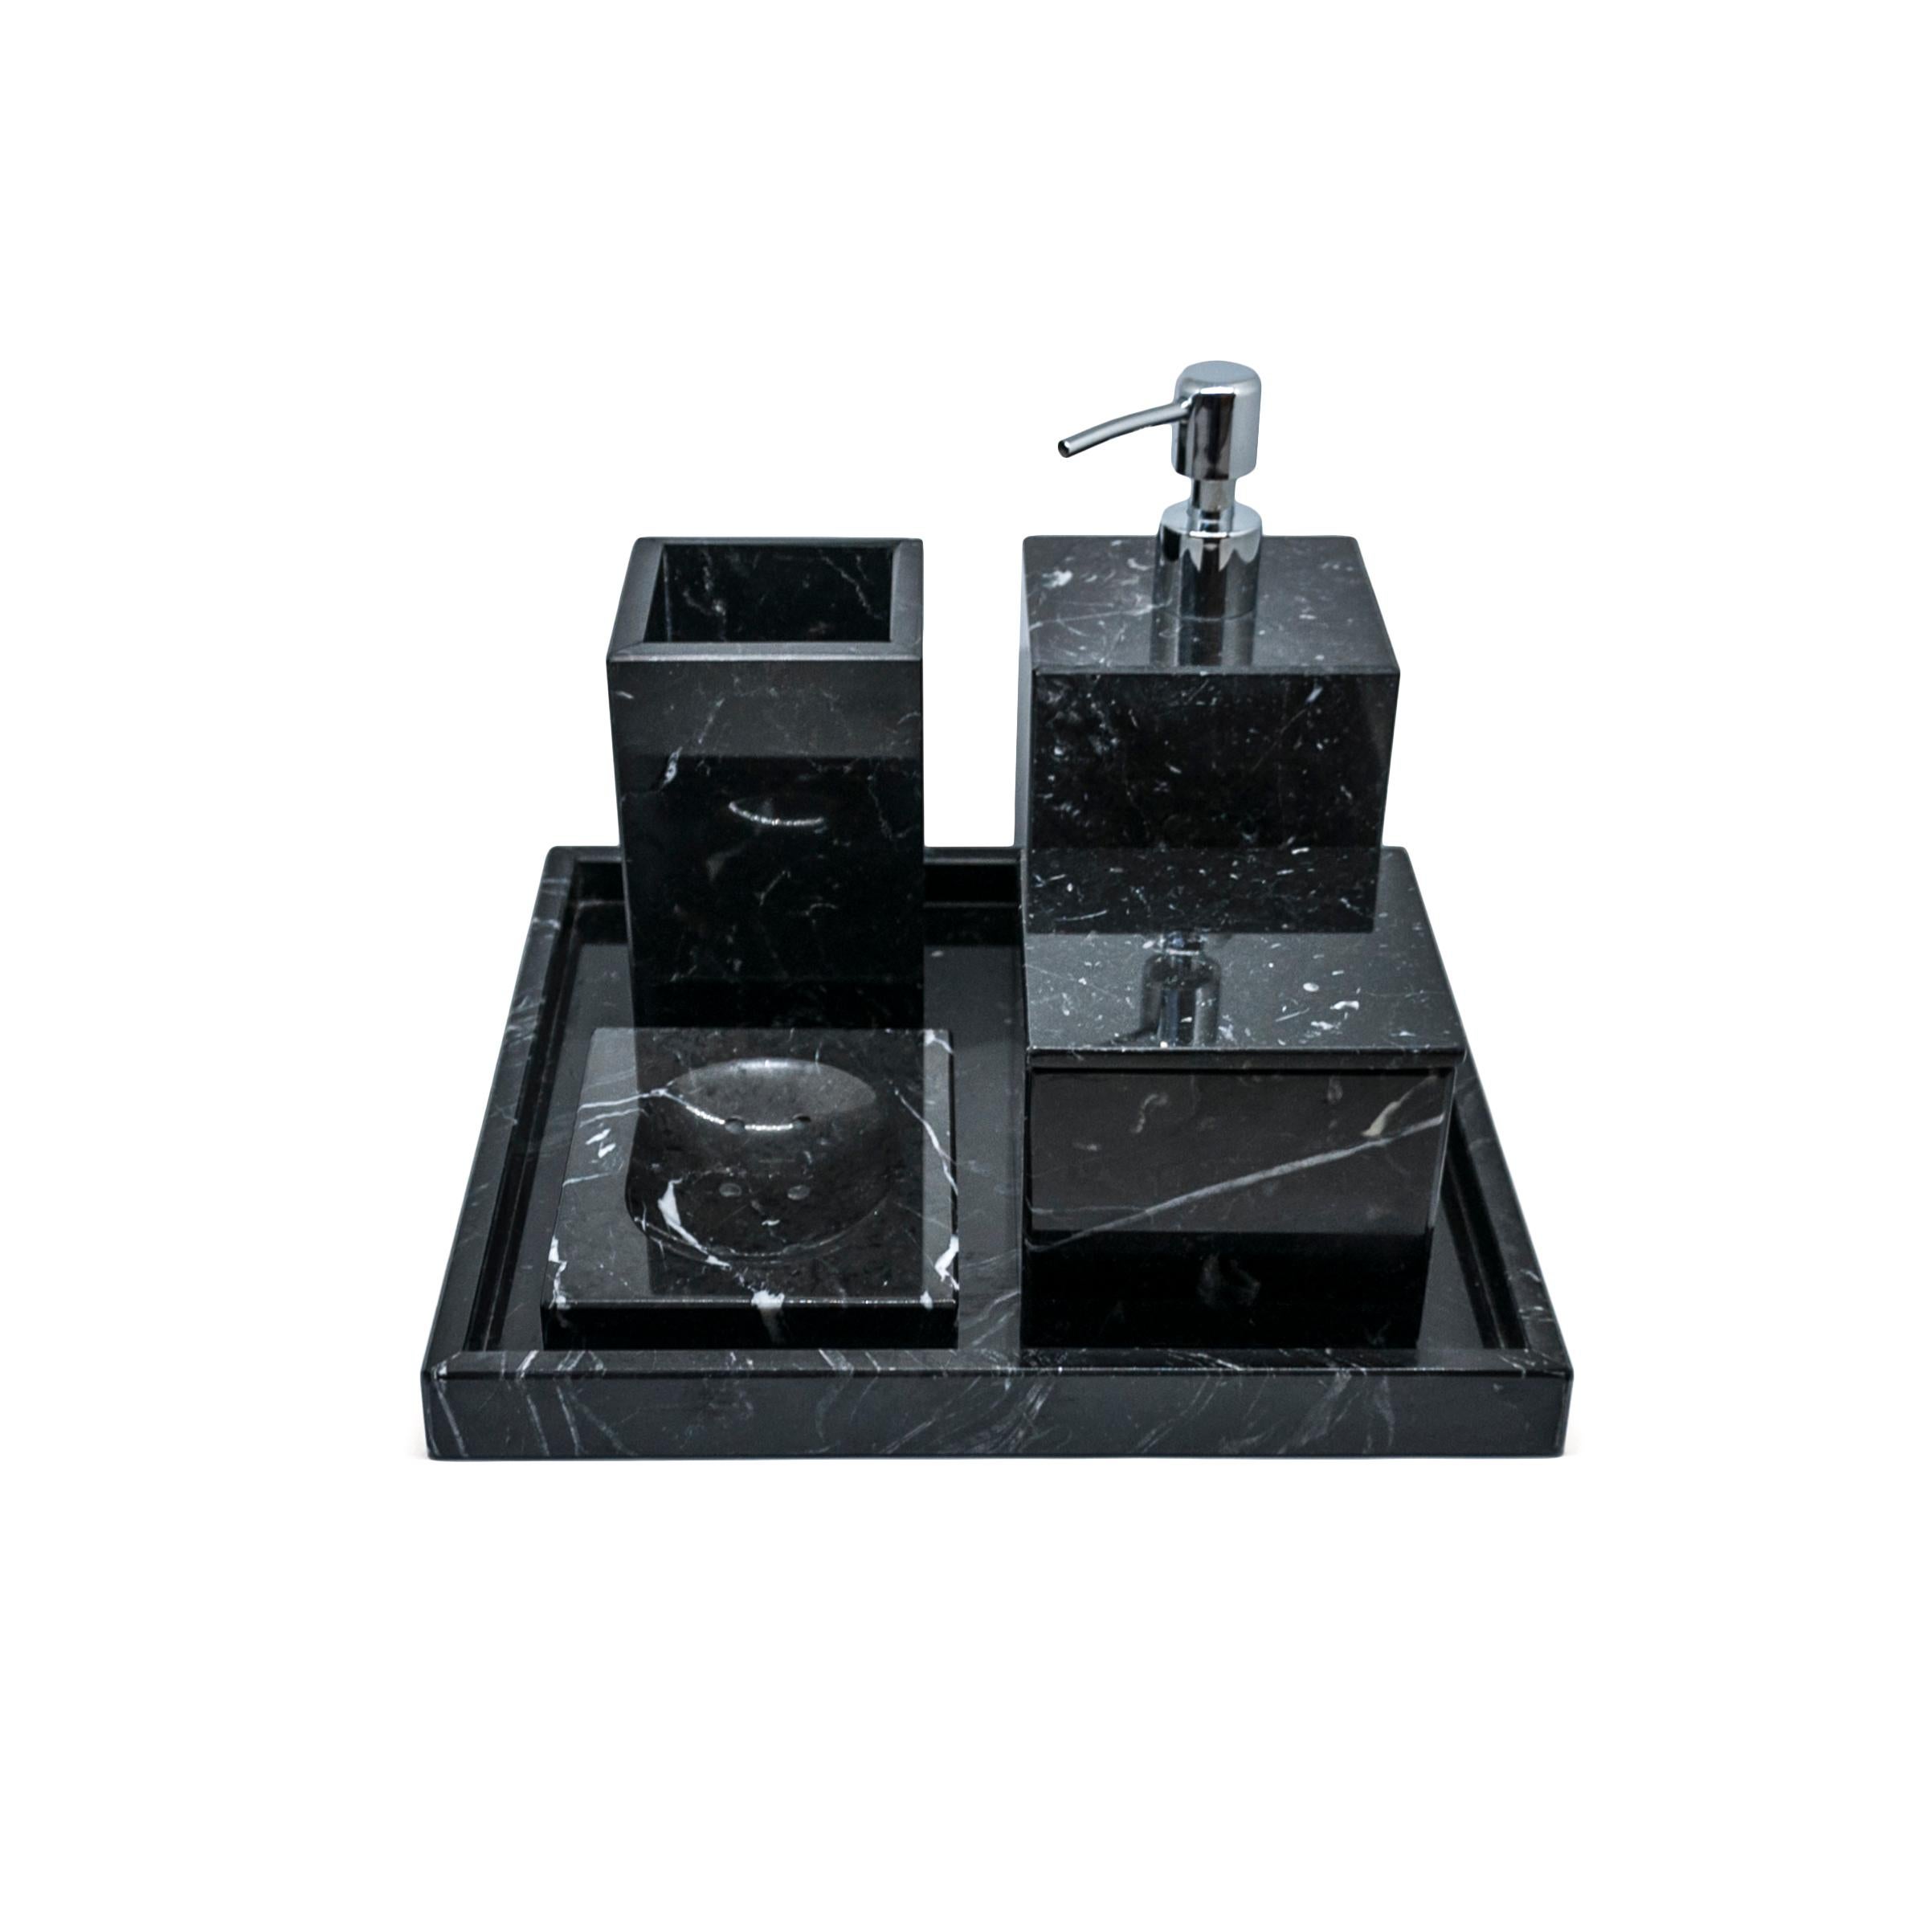 A complete squared set for the bathroom in black Marquina marble which includes: one soap dispenser (9 x 9 x 19 cm), one soap dish (10 x 13 x 2 cm), one toothbrush holder (8.5 x 8.5 x 12 cm), one box holder with lid (9.5 x 9.5 x 9.5 cm), one spa